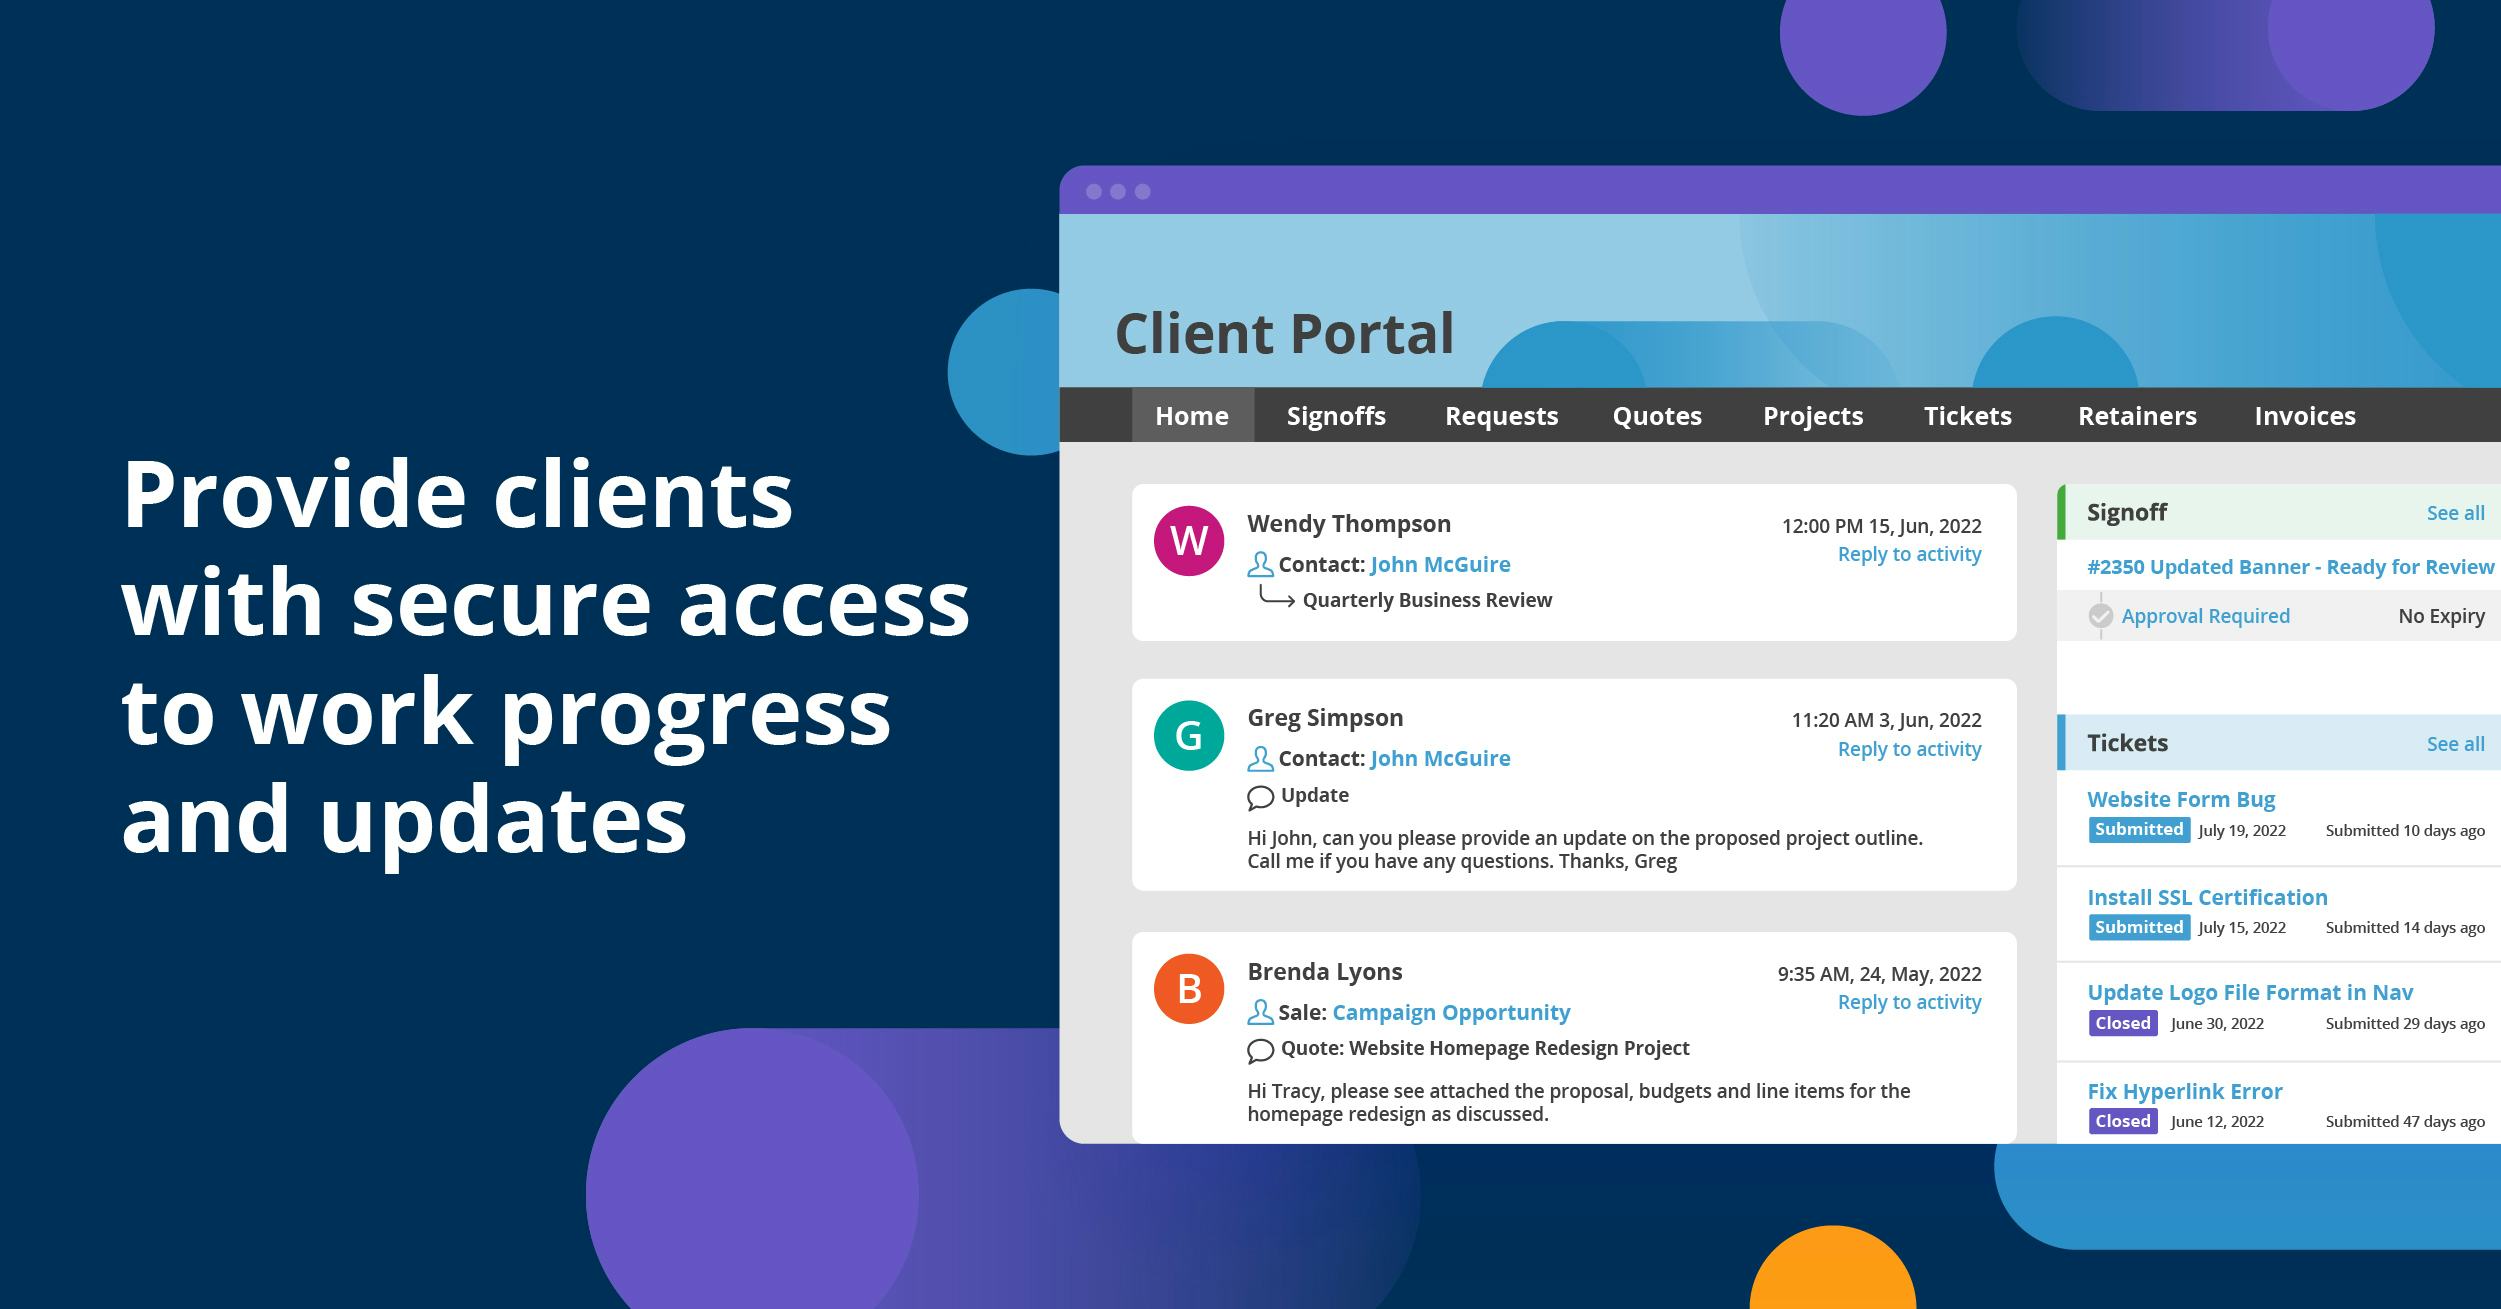 Accelo Software - Client Portal - Provide clients with secure access to work progress and updates